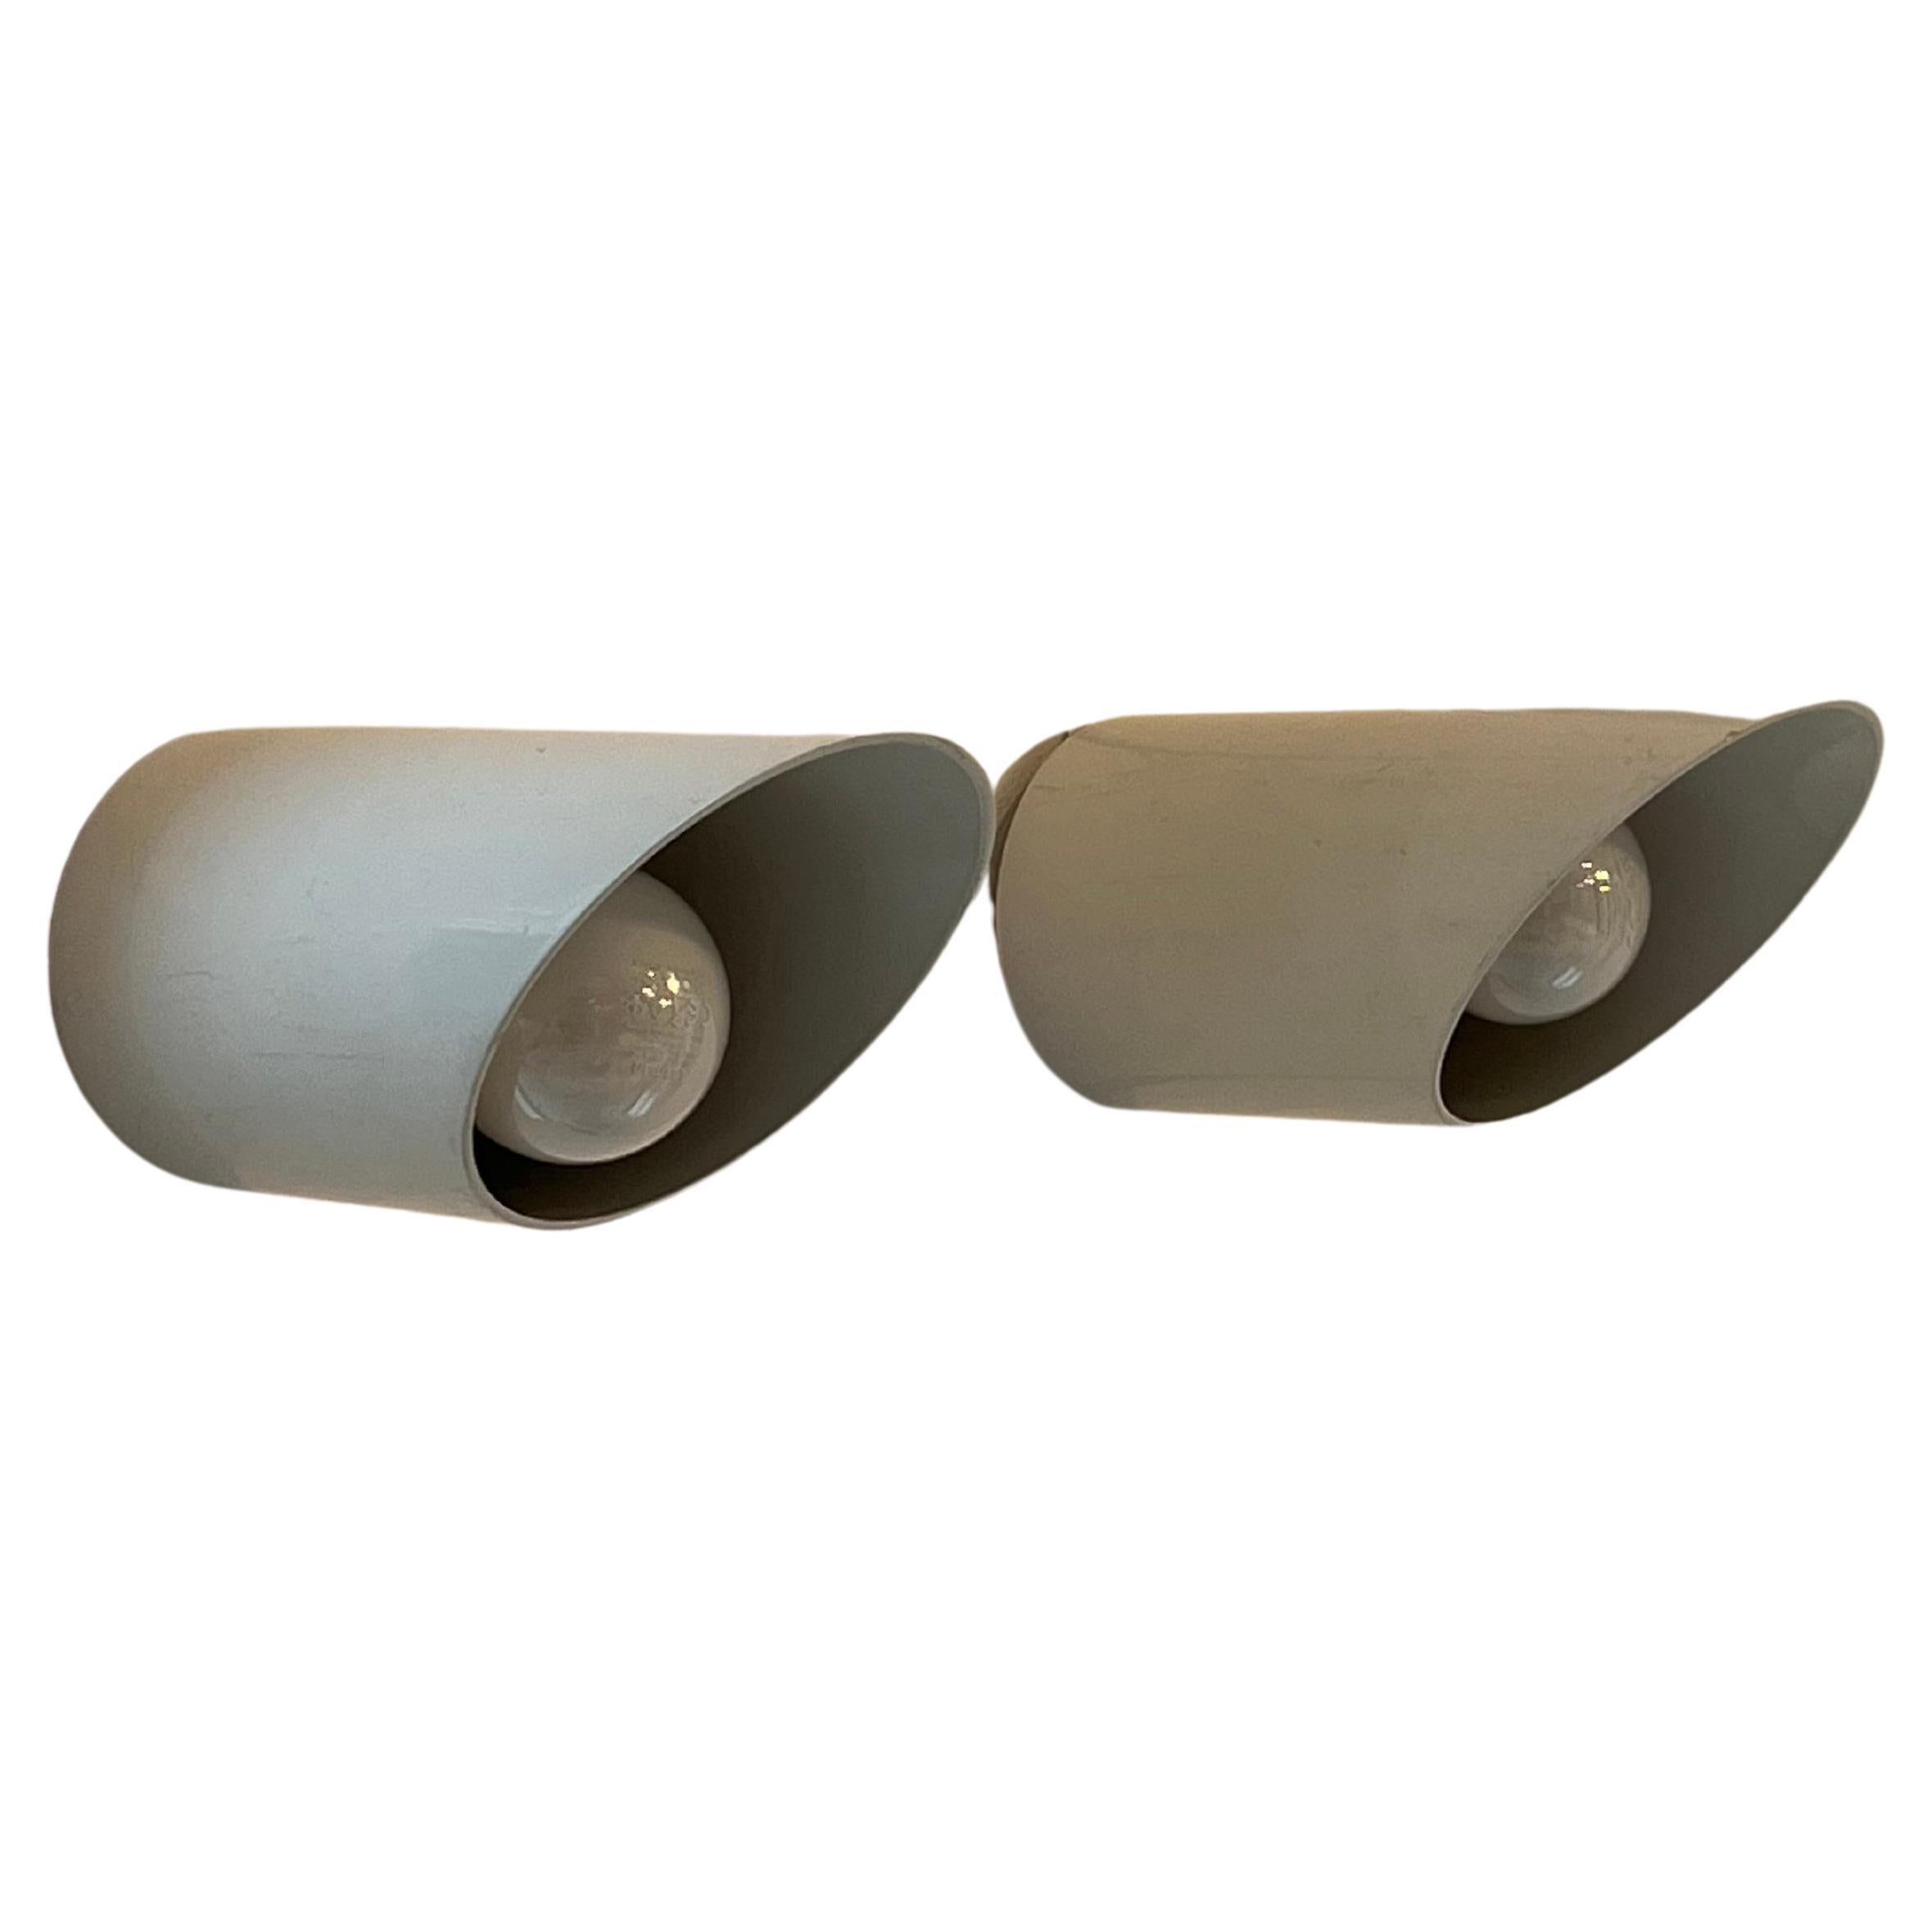 Pair of Obliqua wall lights by Ignazia Favata and Claudio Dini for Bieffeplast 1